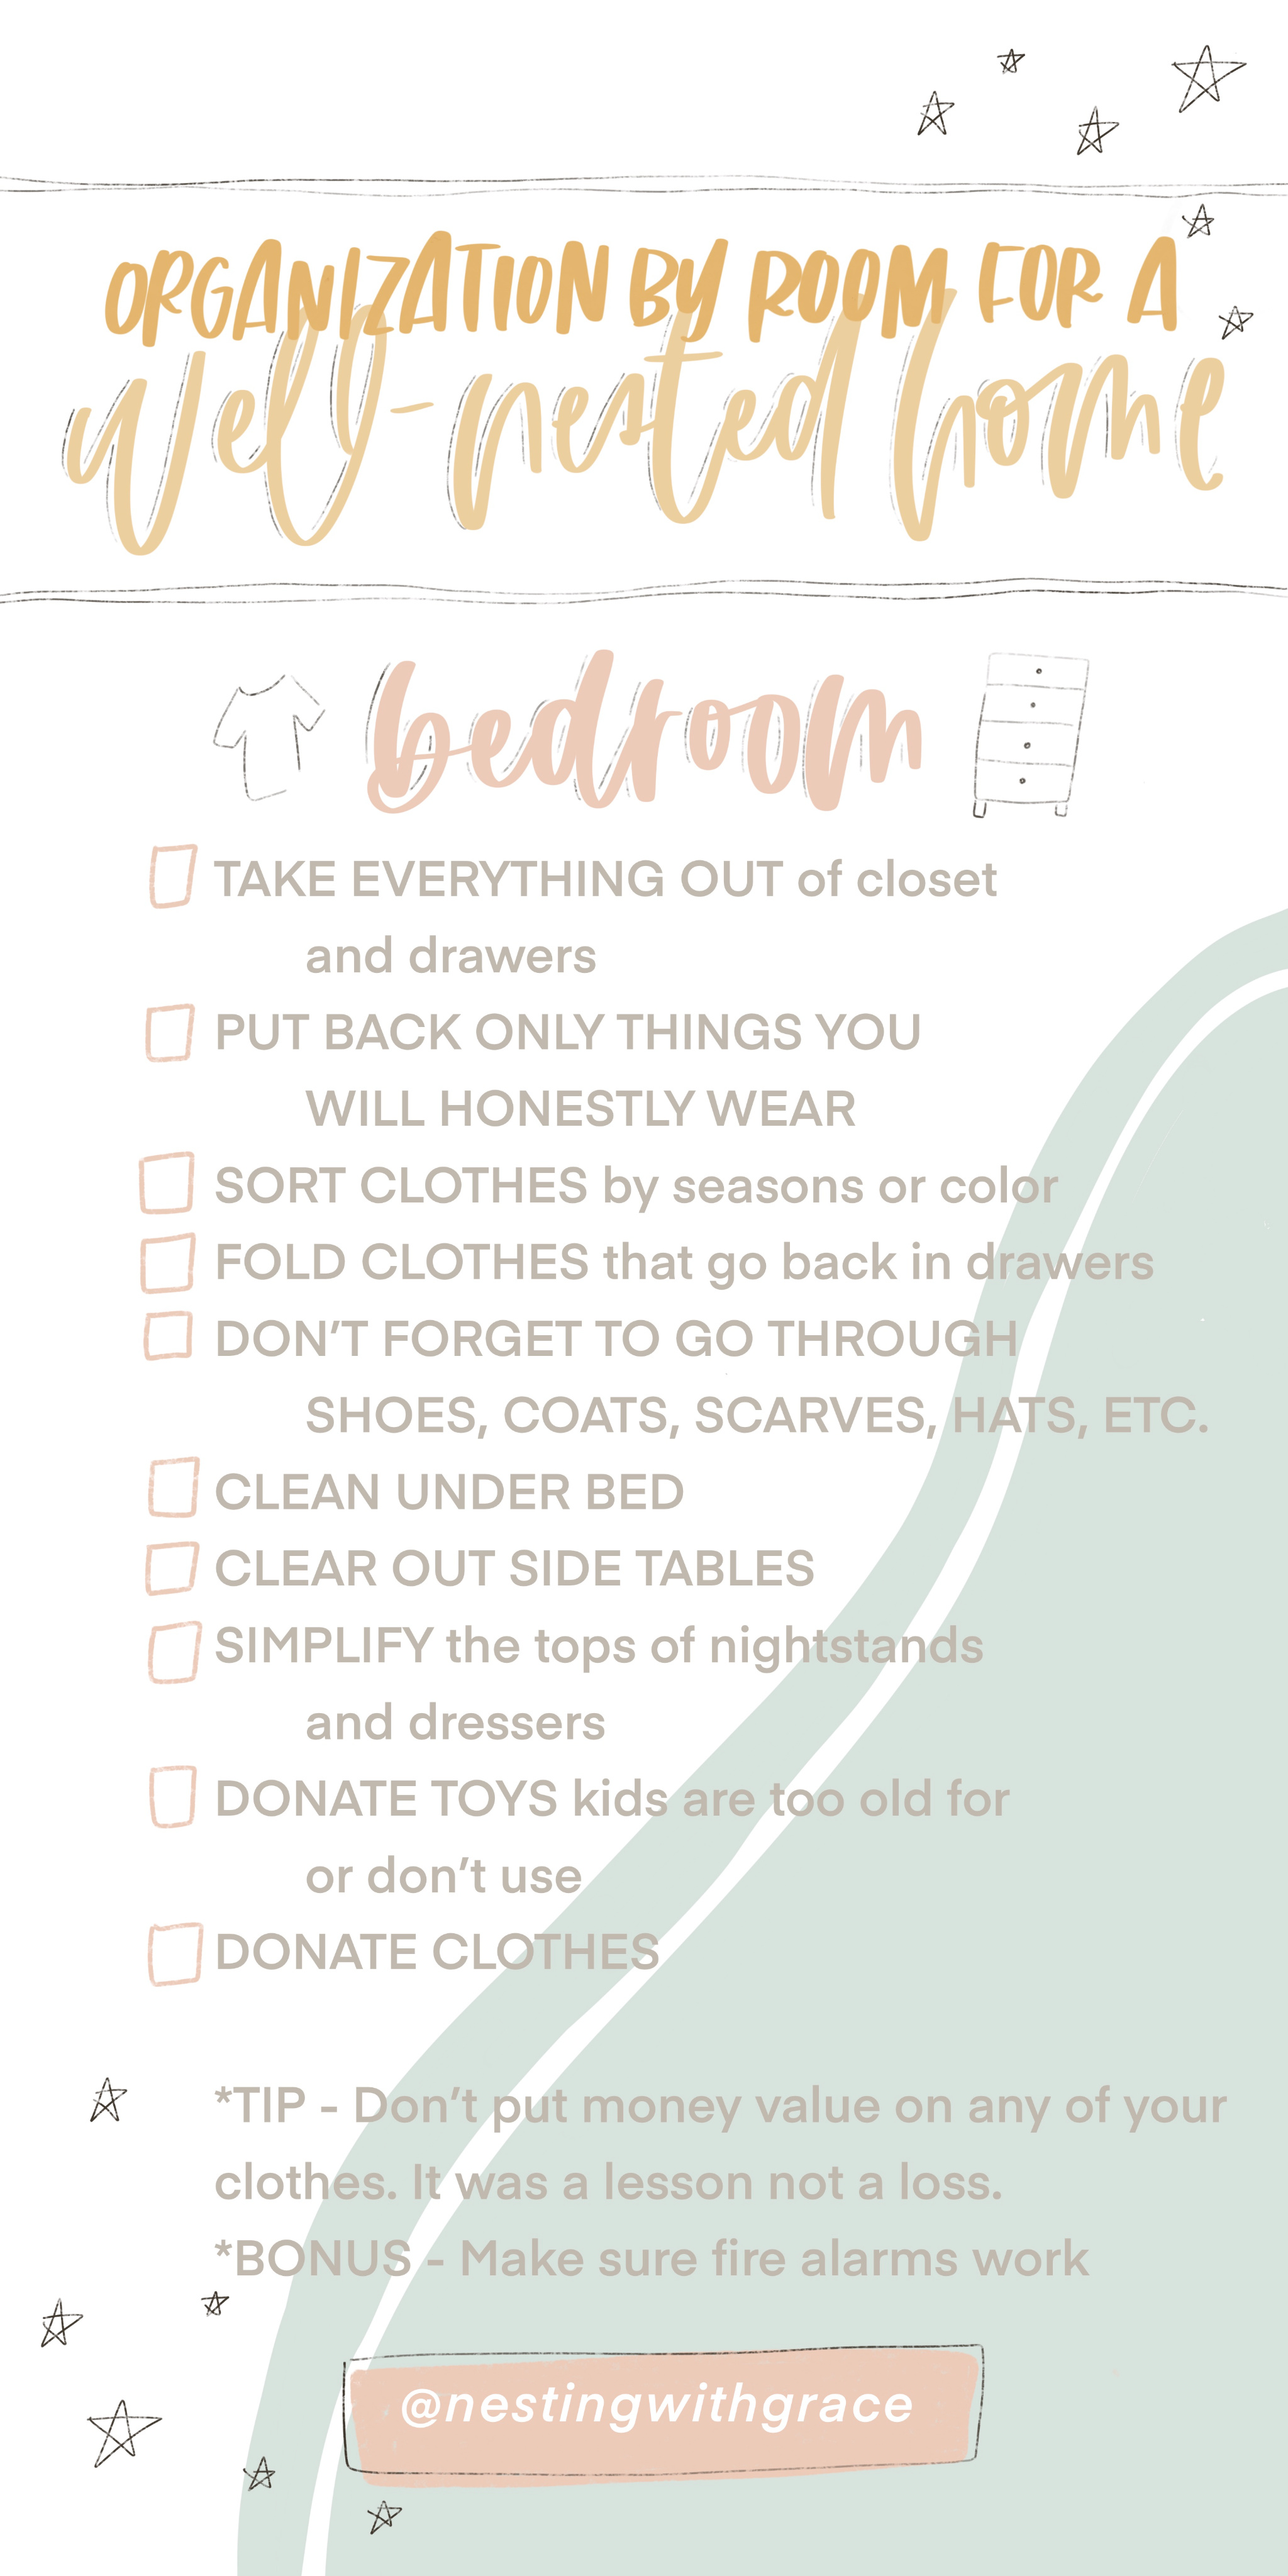 Let's Organize- Organizing Checklist By Room